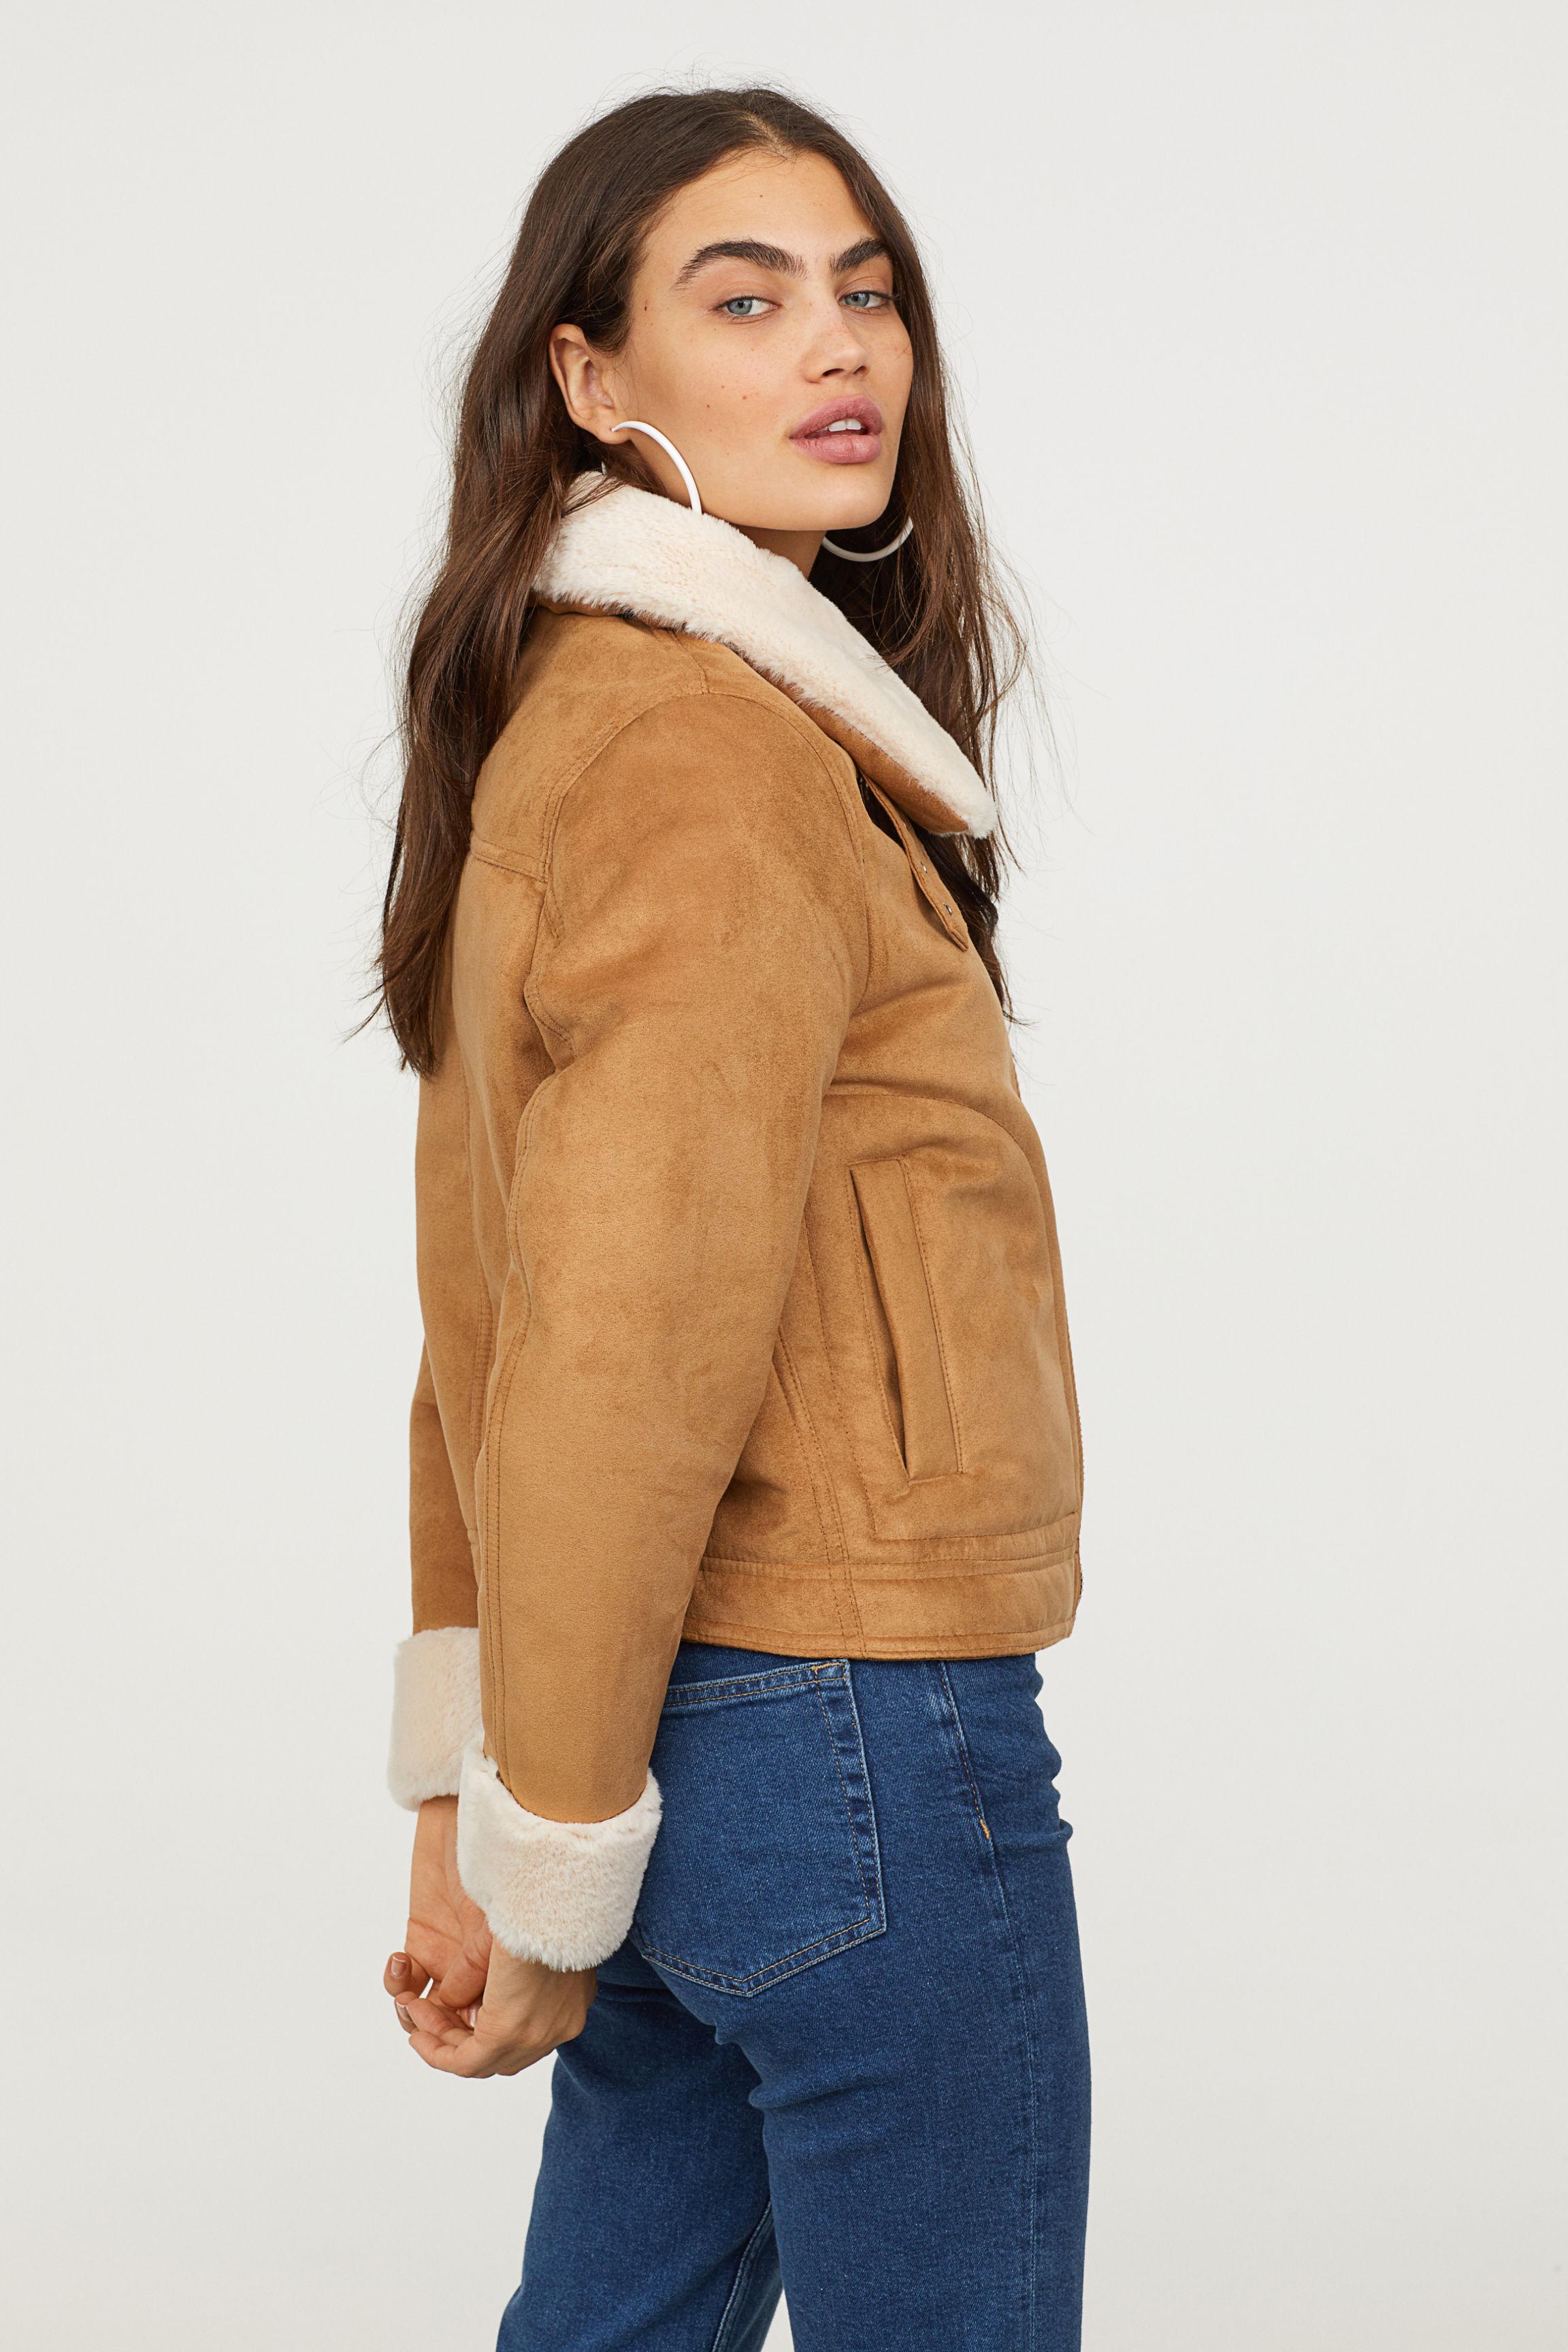 H&M Jacket With Faux Fur Lining in Dark Beige (Natural) - Lyst